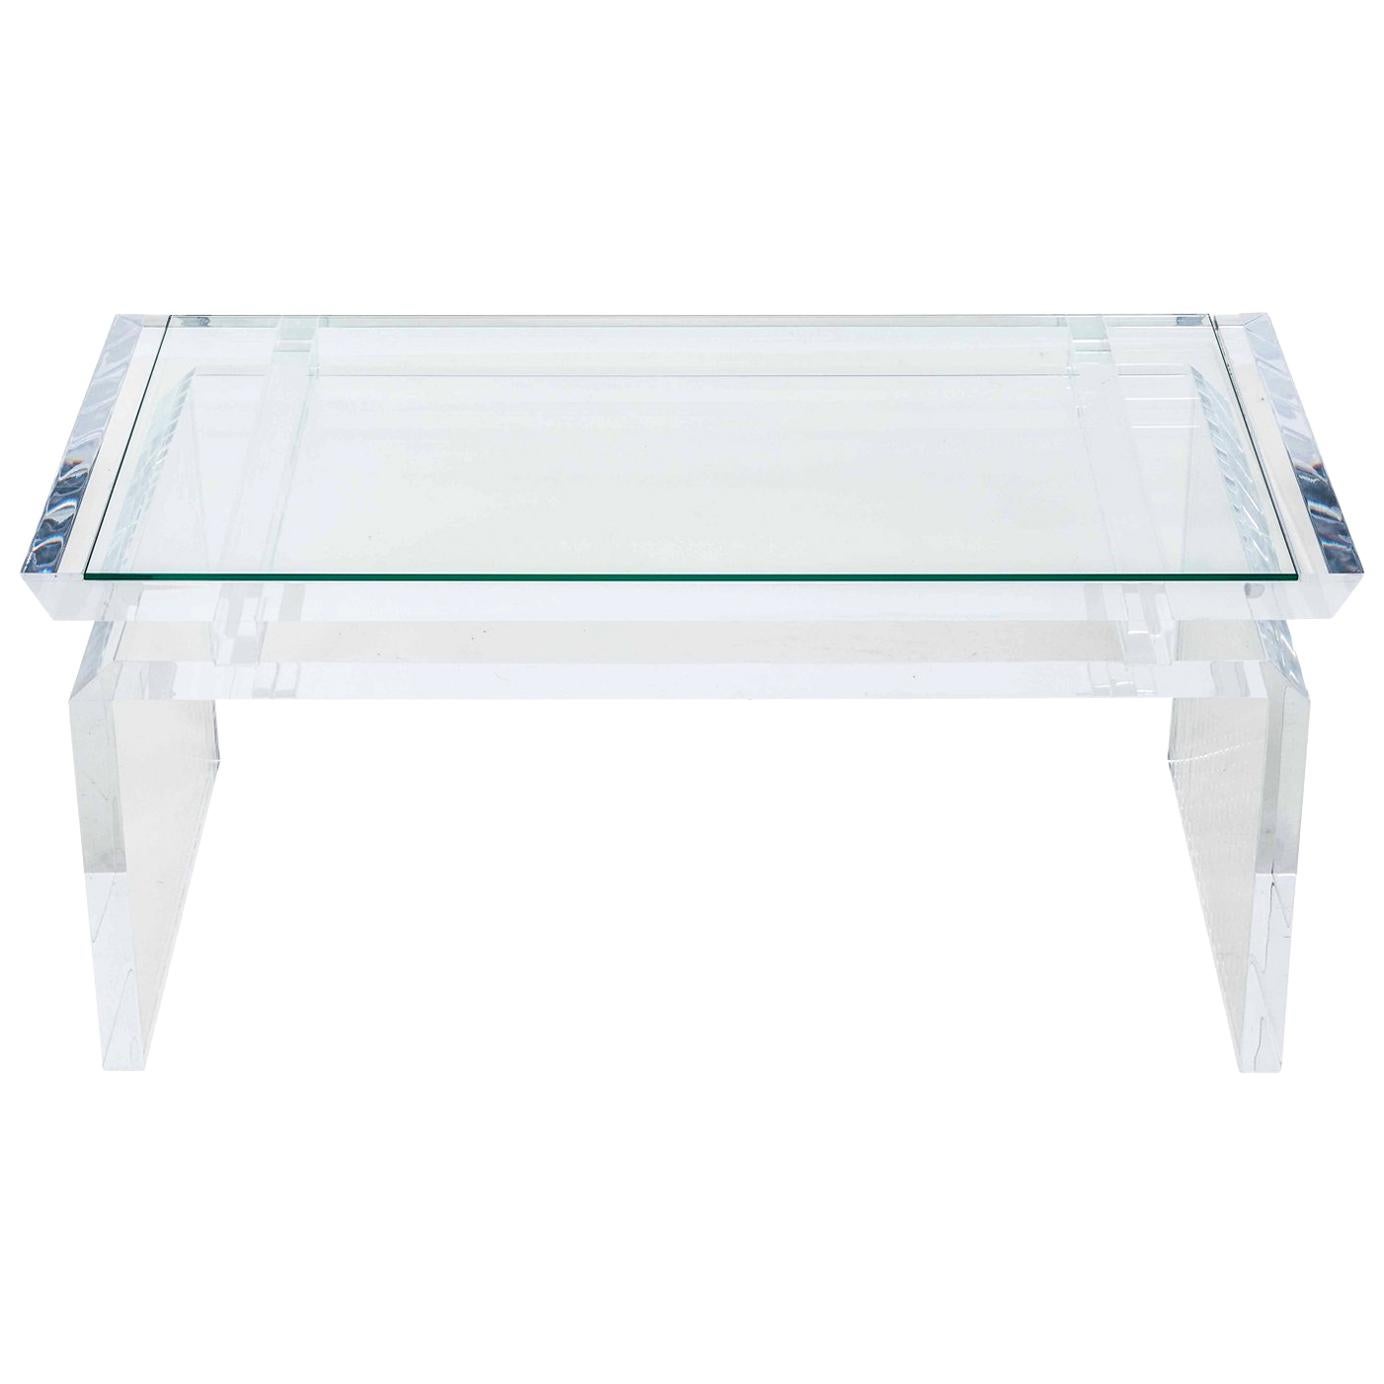 Modern Chinoise Lucite Cocktail Table, circa 1970s For Sale